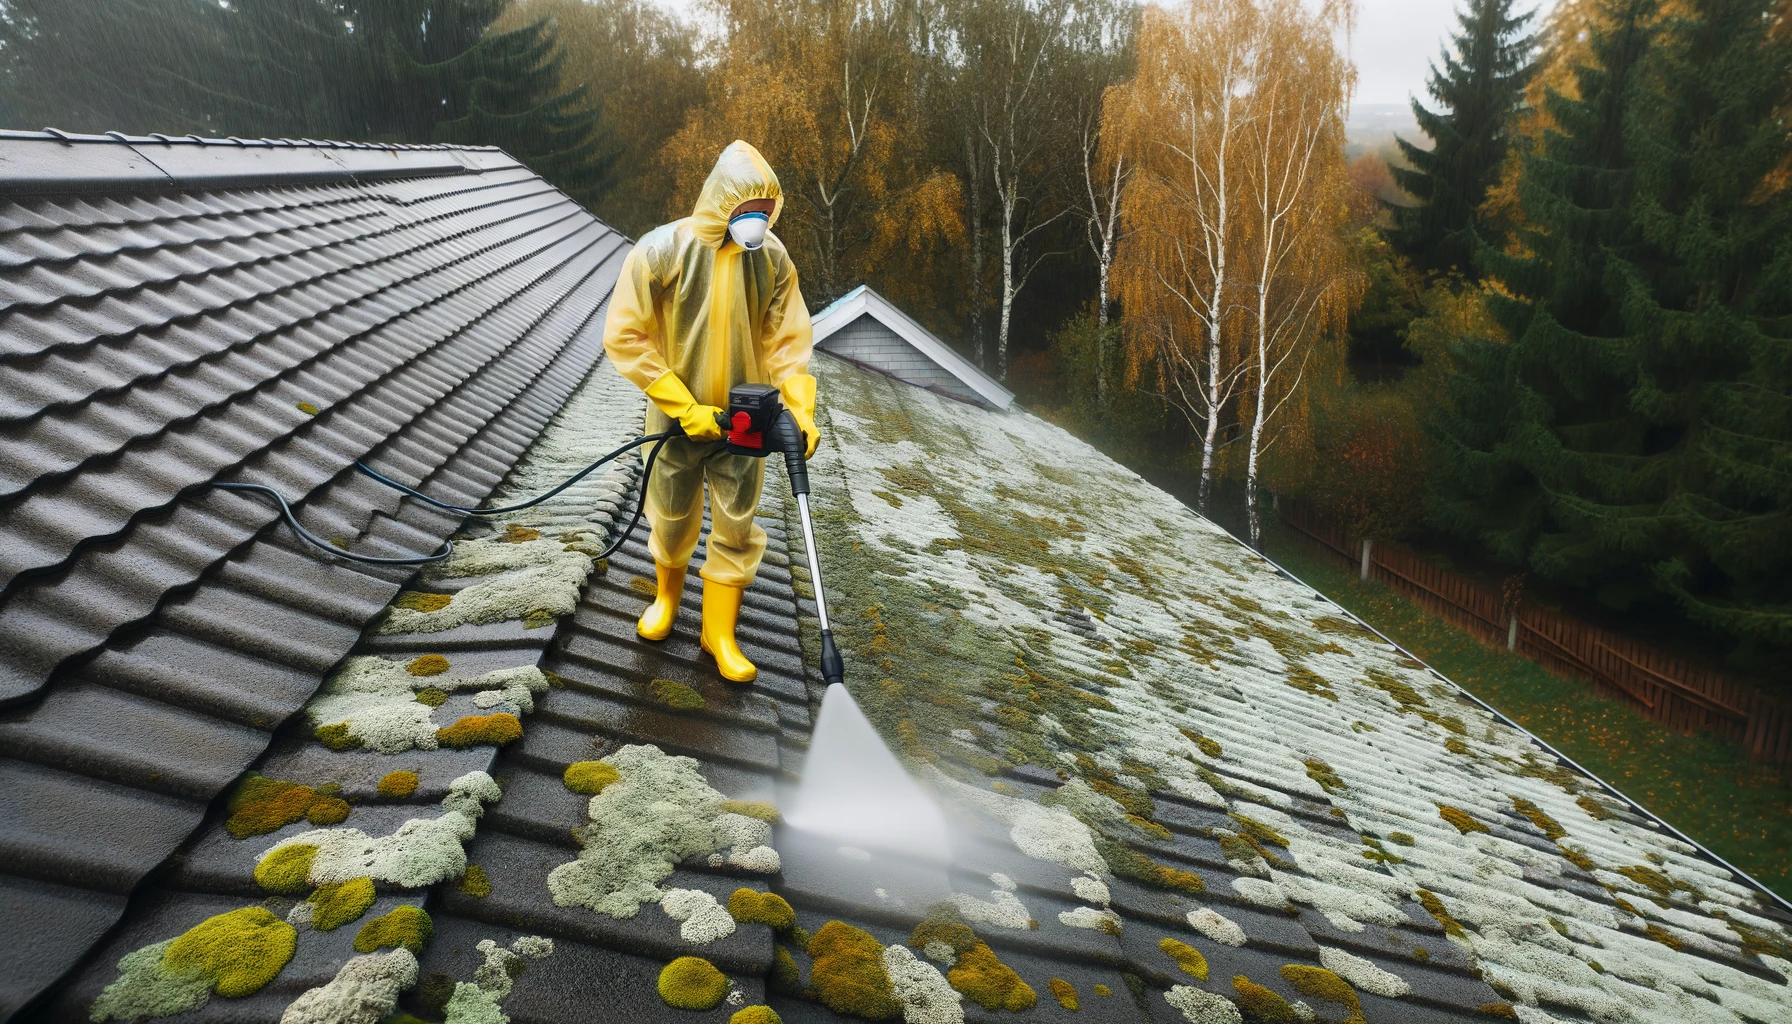 Person pressure washing mossy roof safely.